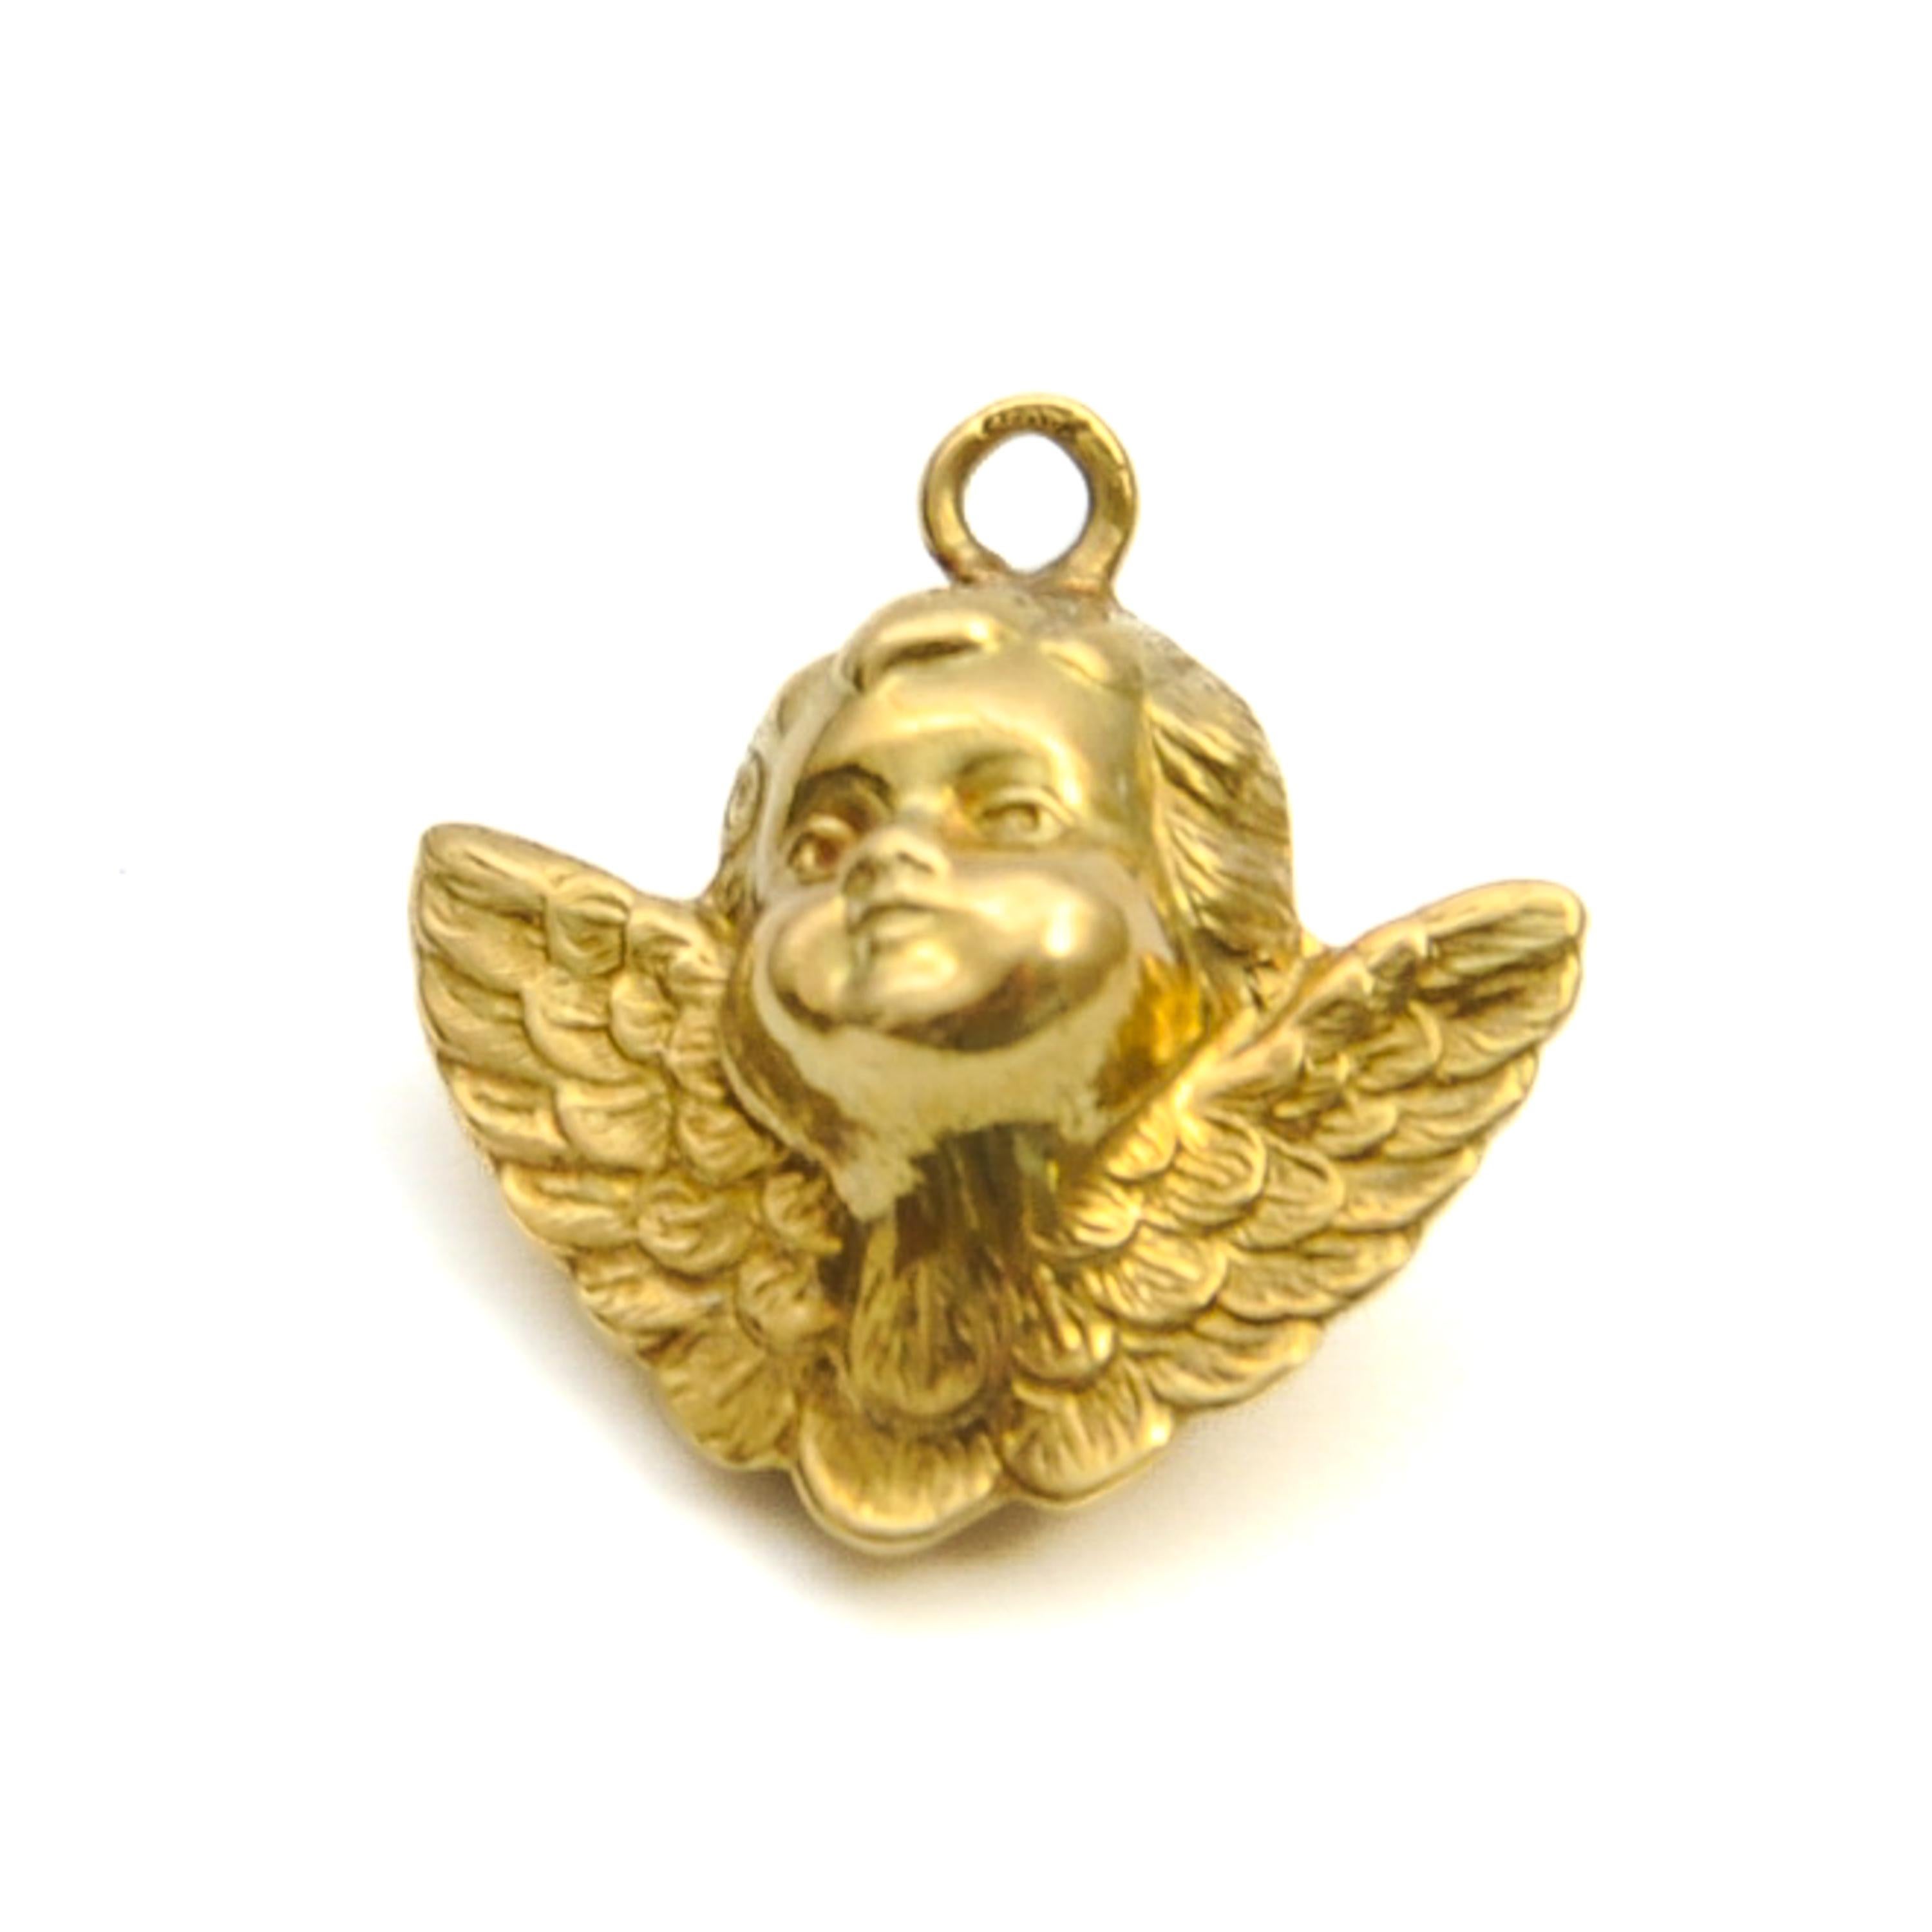 Vintage 14K Gold Cherub Charm Pendant In Good Condition For Sale In Rotterdam, NL